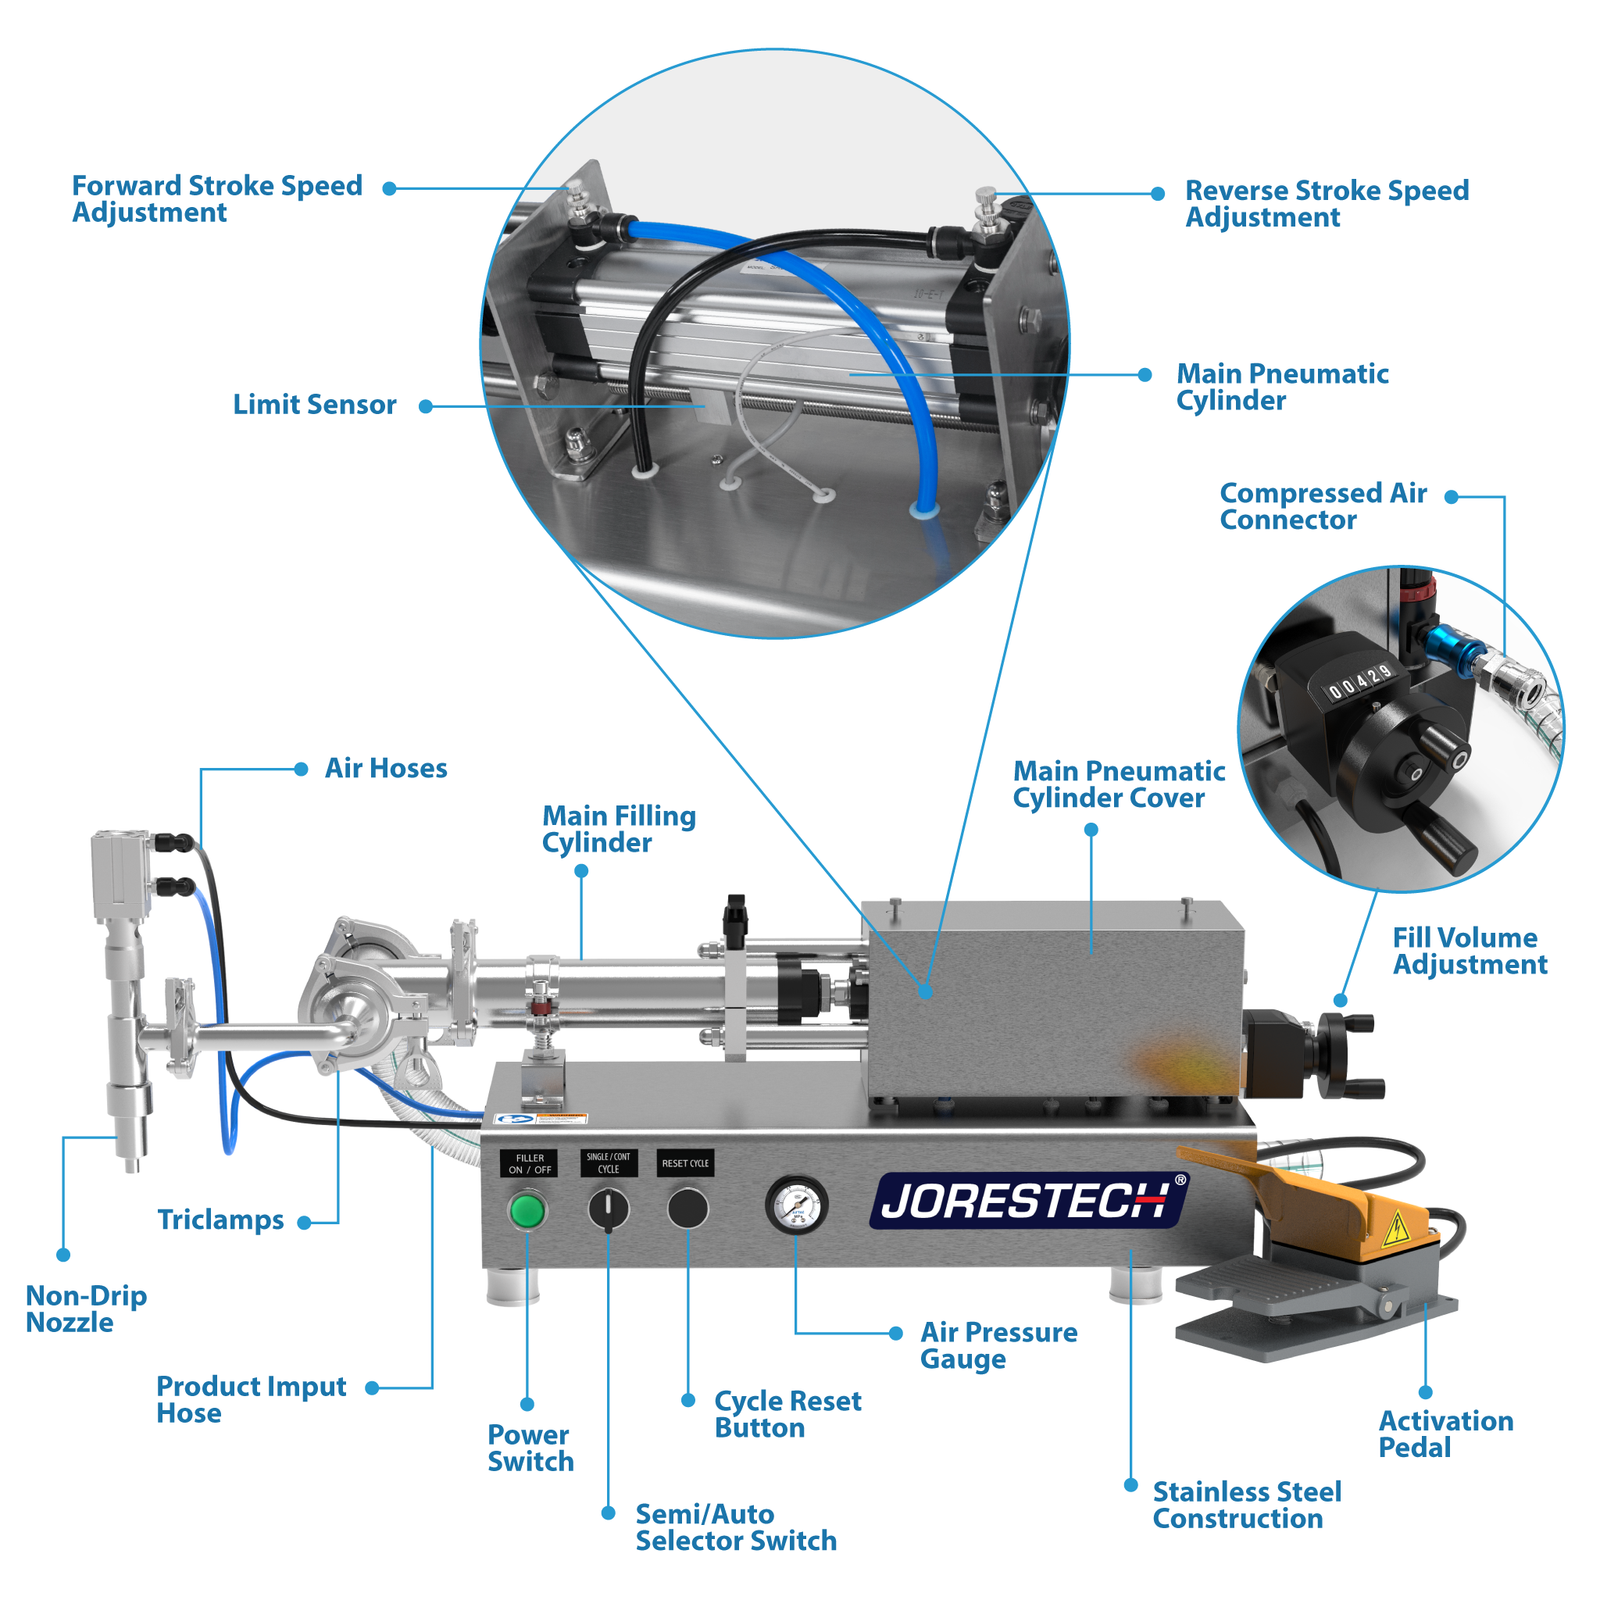  Liquid Piston Filler with call-outs signaling the different parts of the machine in blue font. Two of the main parts mentioned are the Main Pneumatic Cylinder and the Fill Volume Adjuster